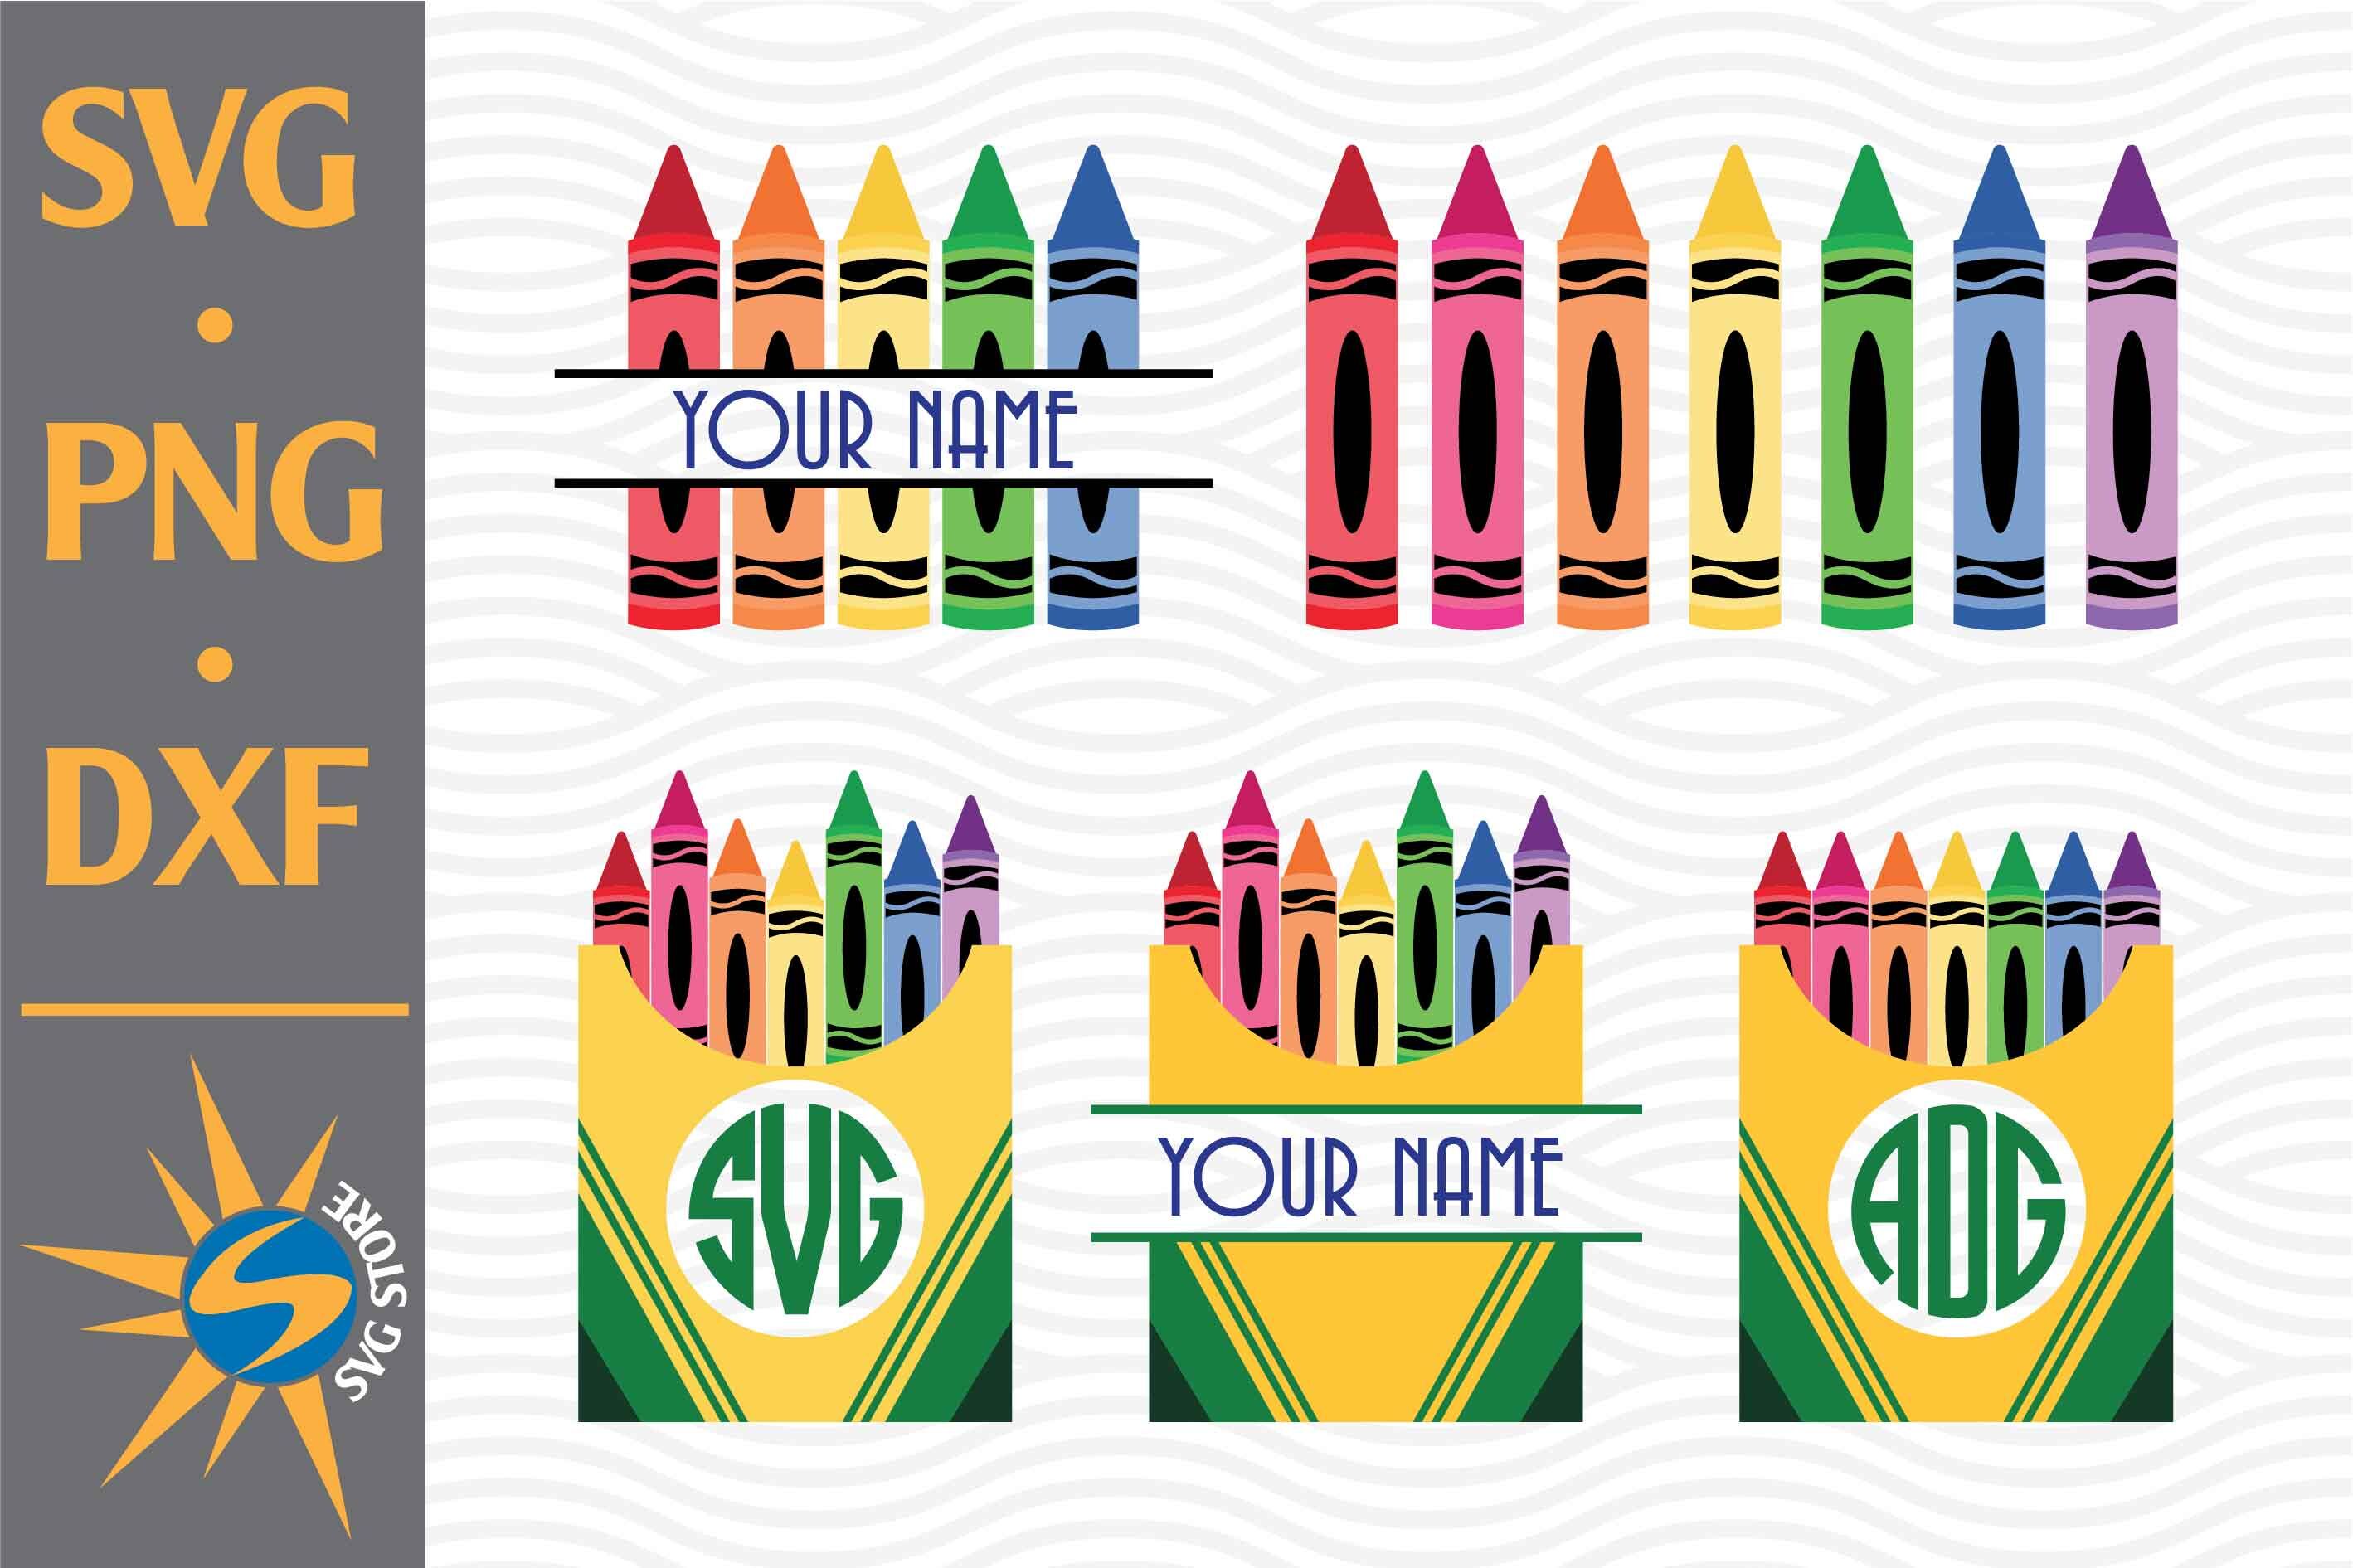 Crayon SVG, PNG, DXF Digital Files Include By SVGStoreShop